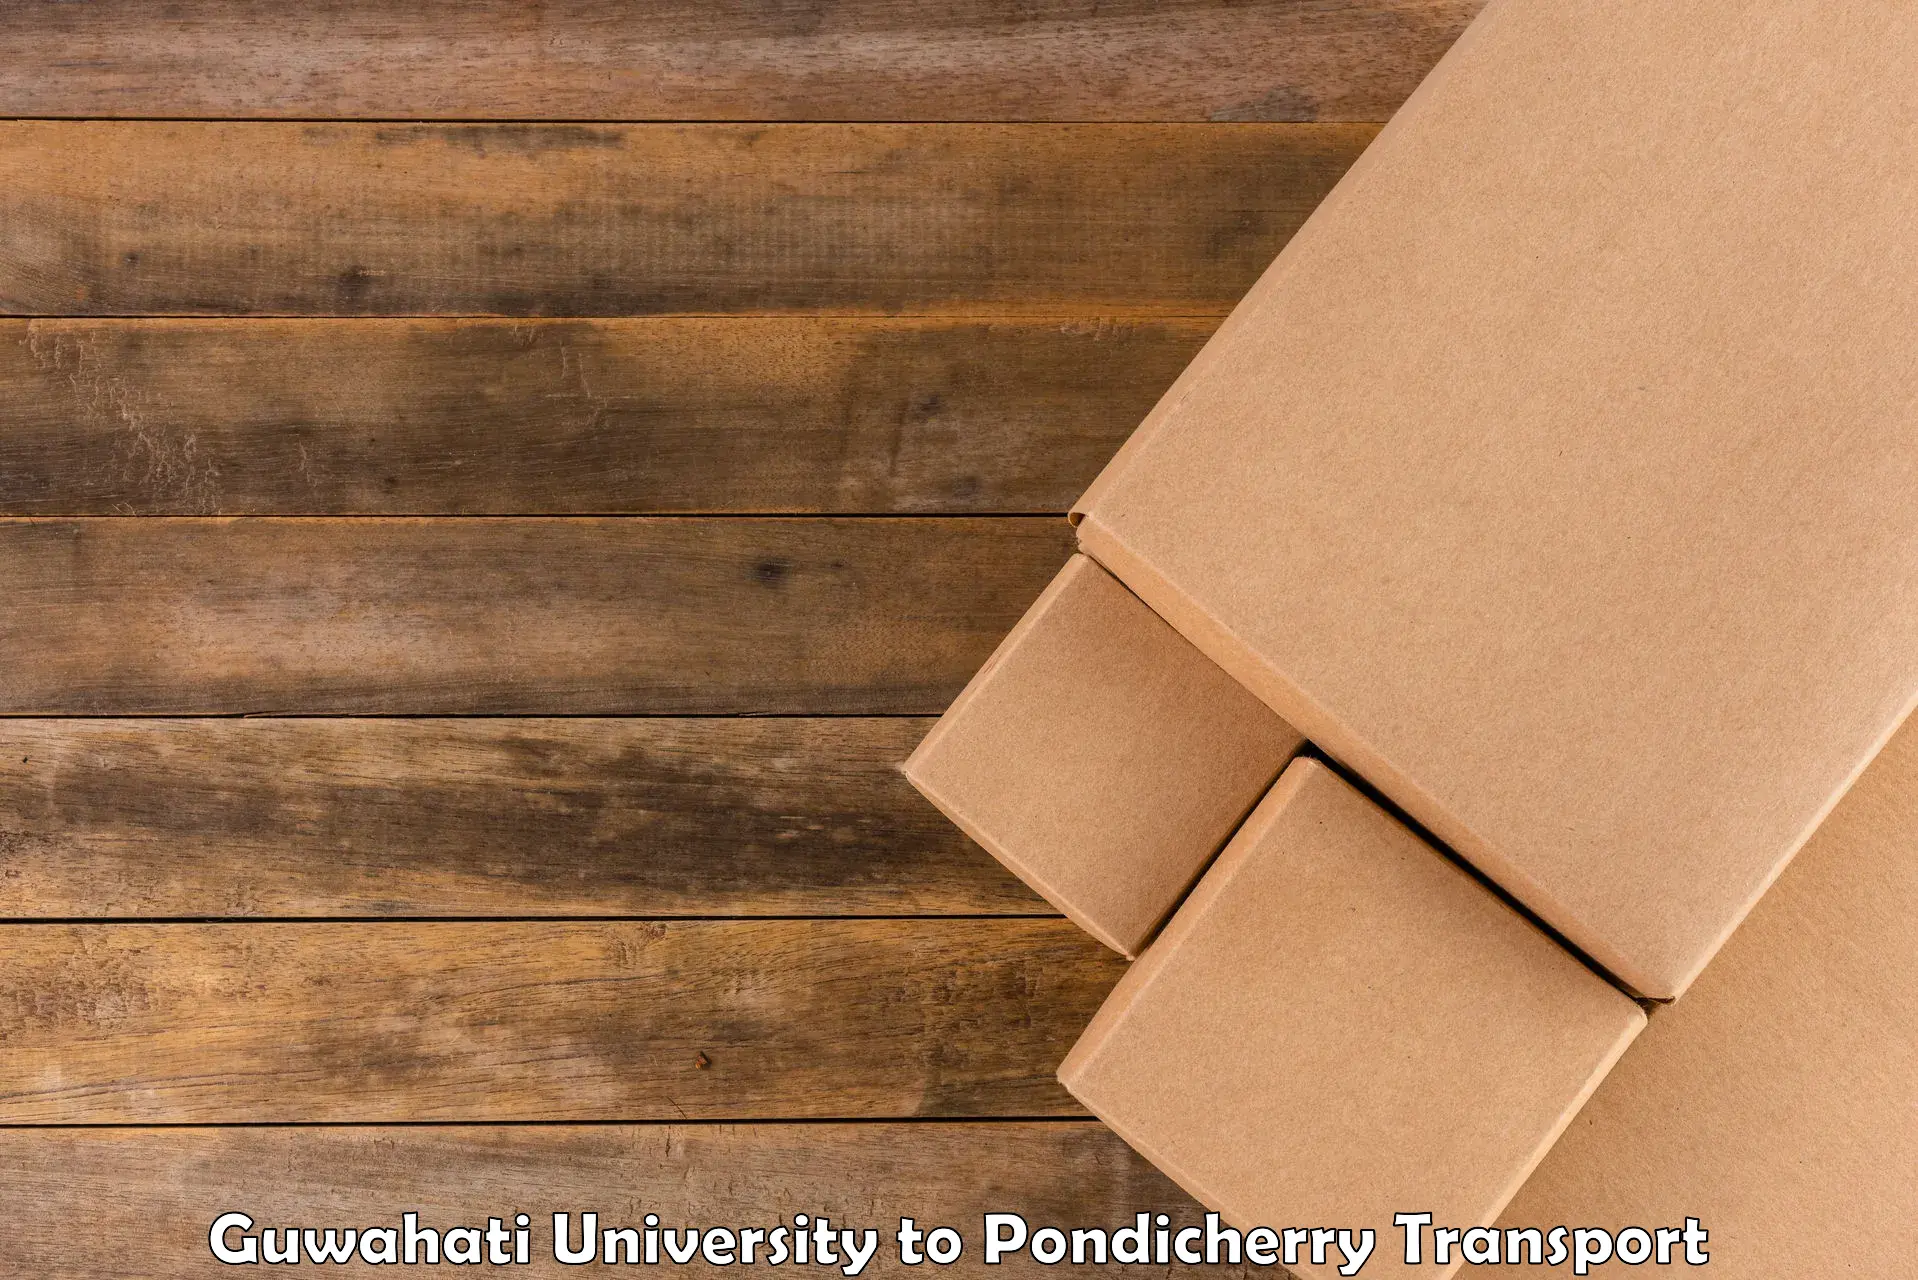 Part load transport service in India in Guwahati University to Pondicherry